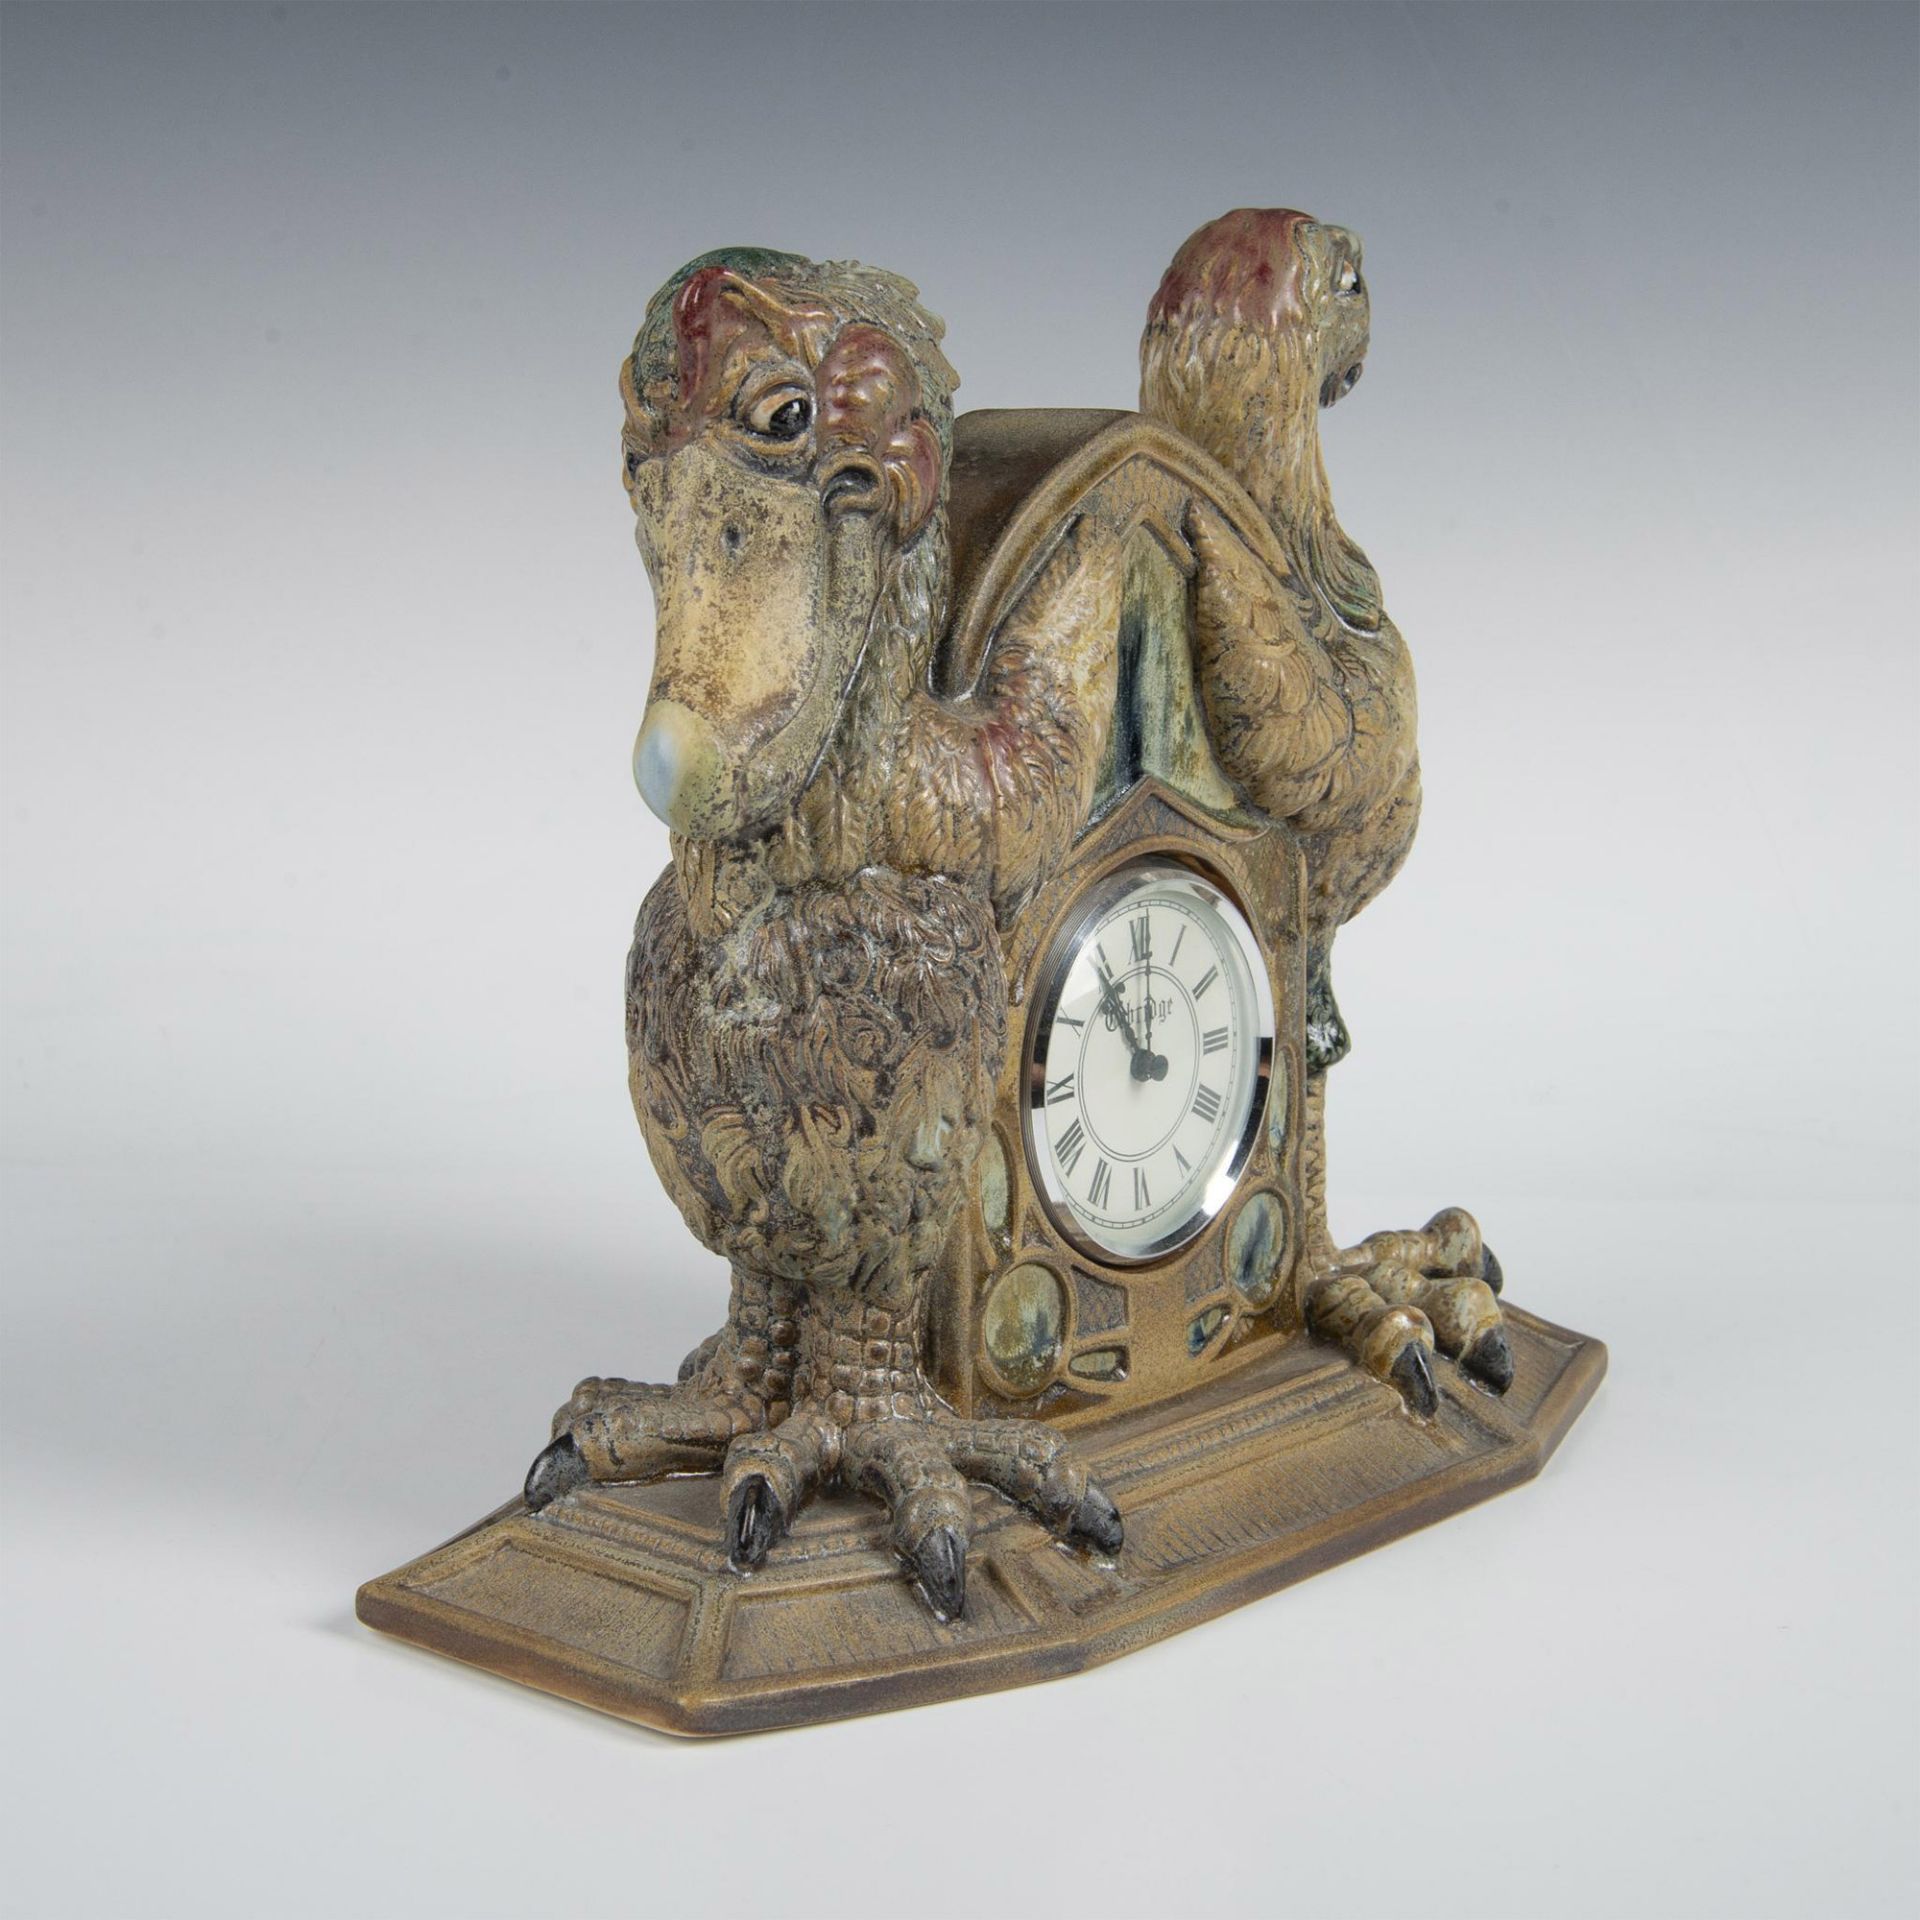 Andrew Hull for Cobridge Stoneware Clock, Caught in Time - Image 4 of 7